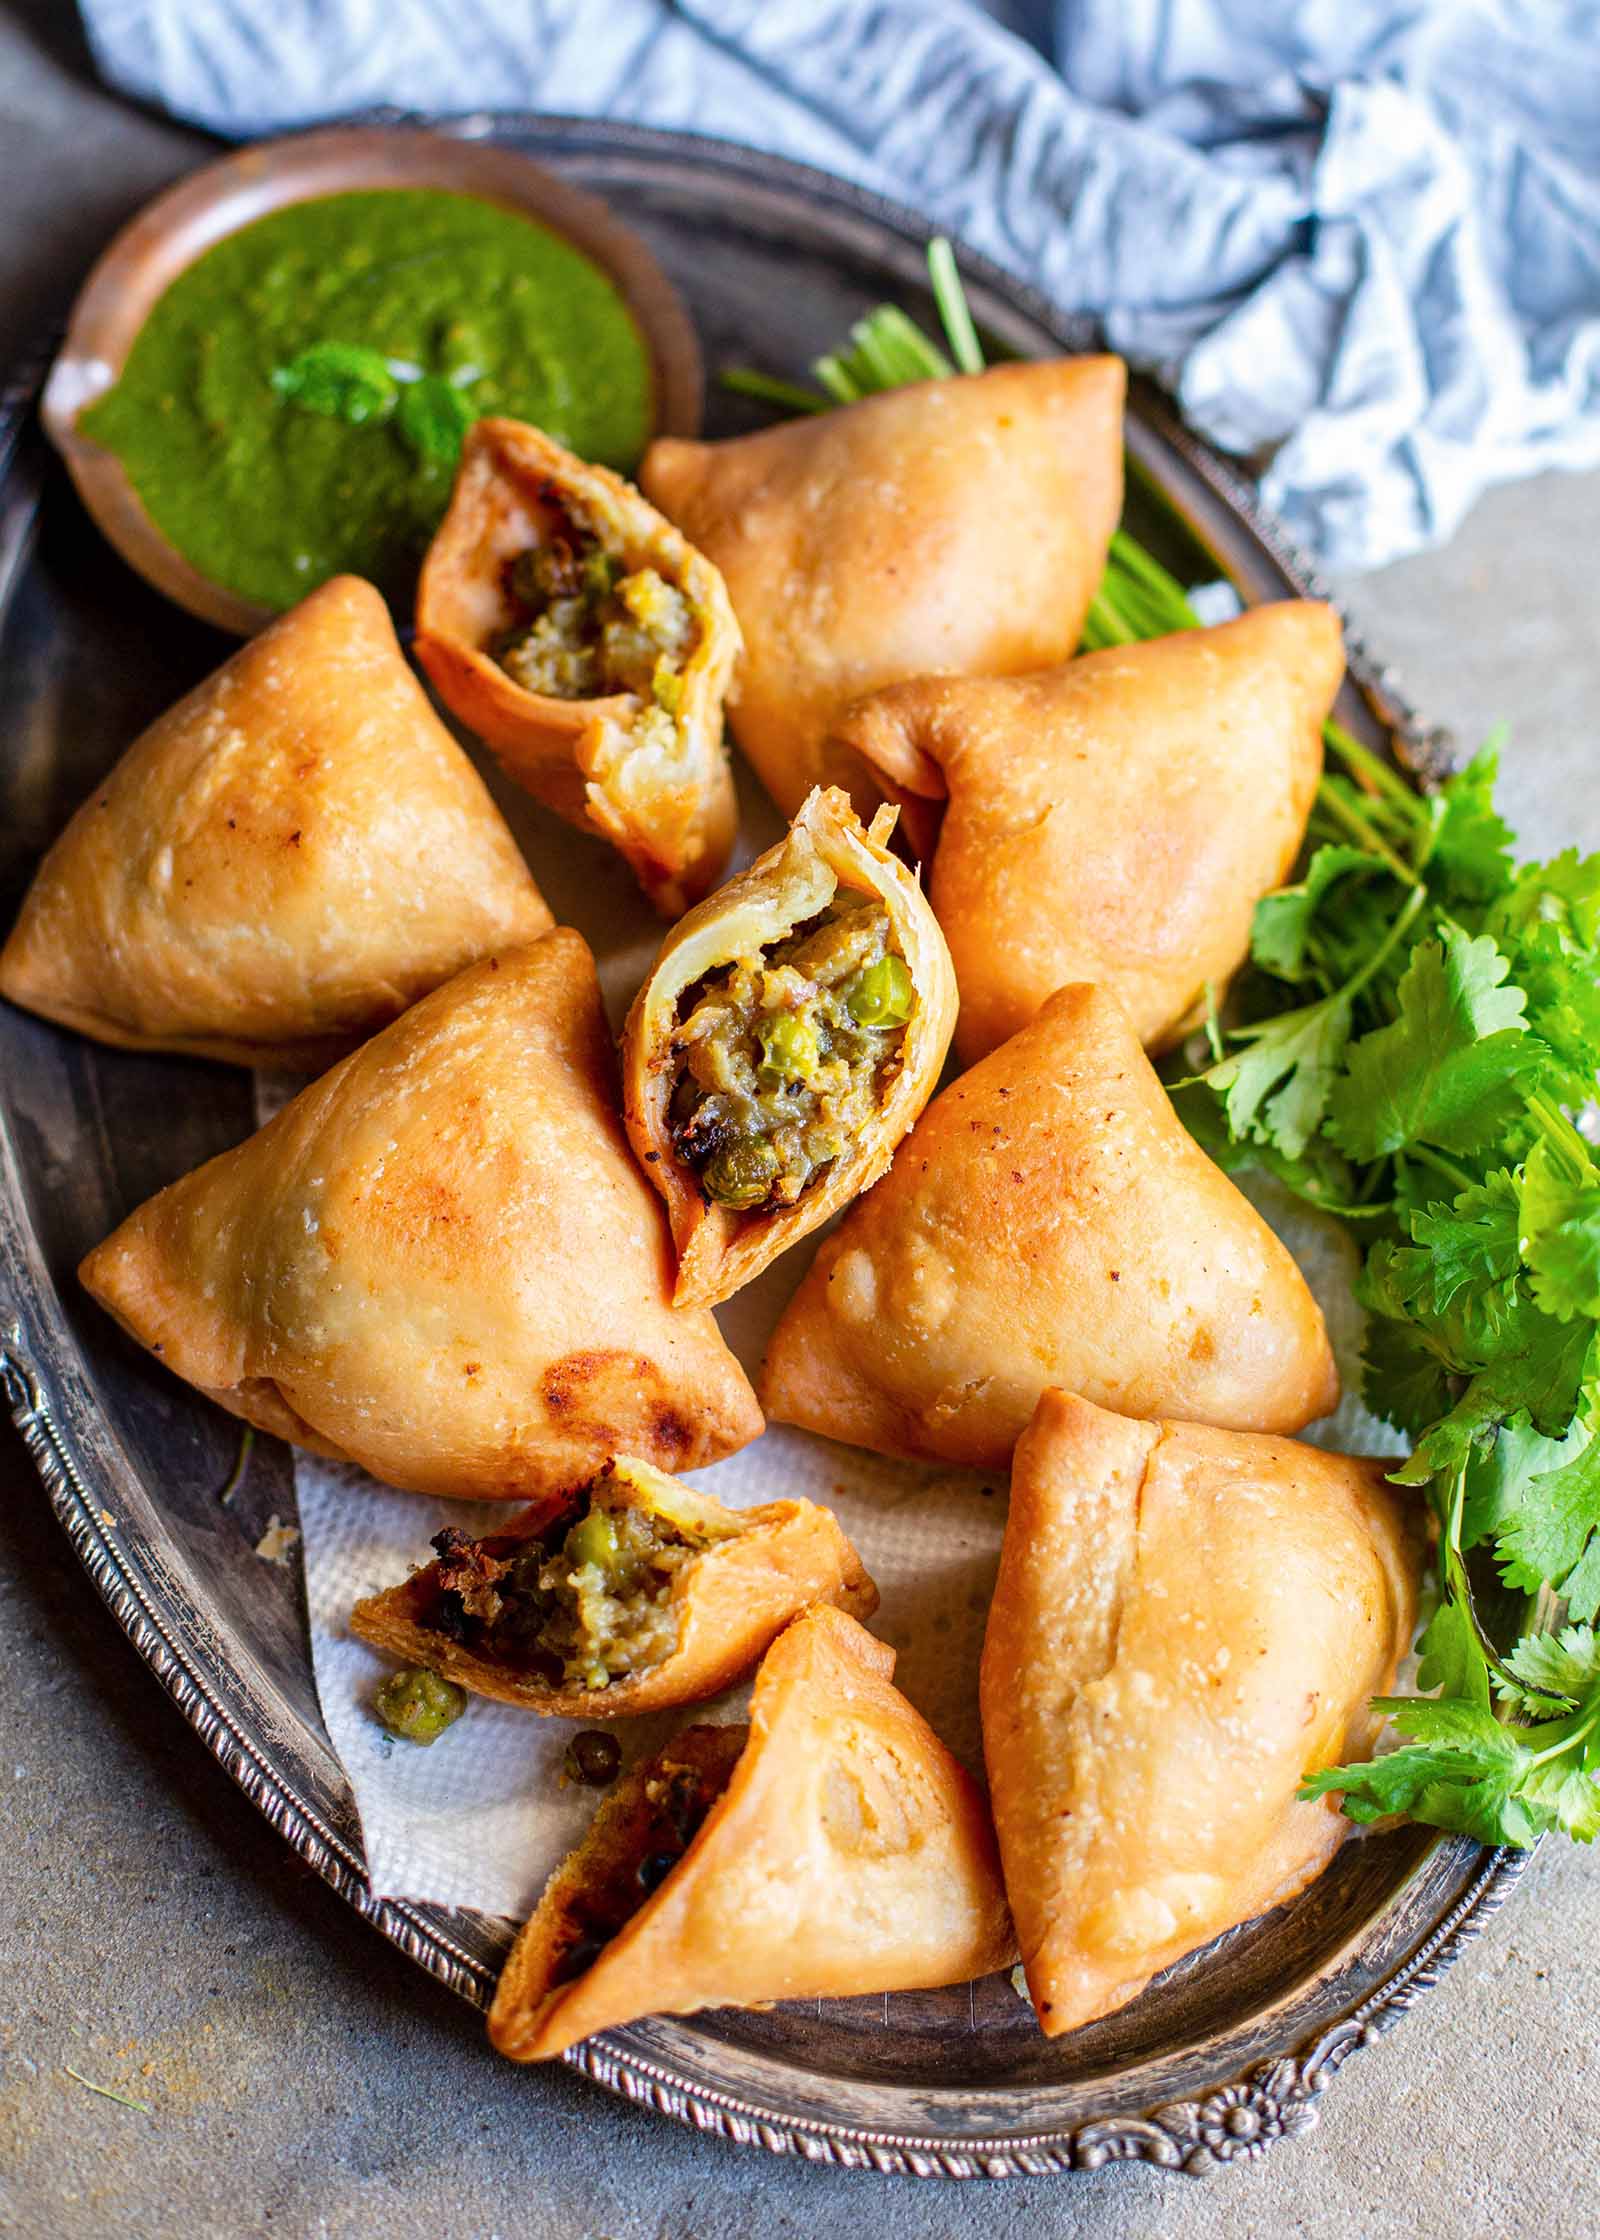 Golden Vegetarian Samosas on a bed of herbs with one samosa broken open to show the potato and pea filling.